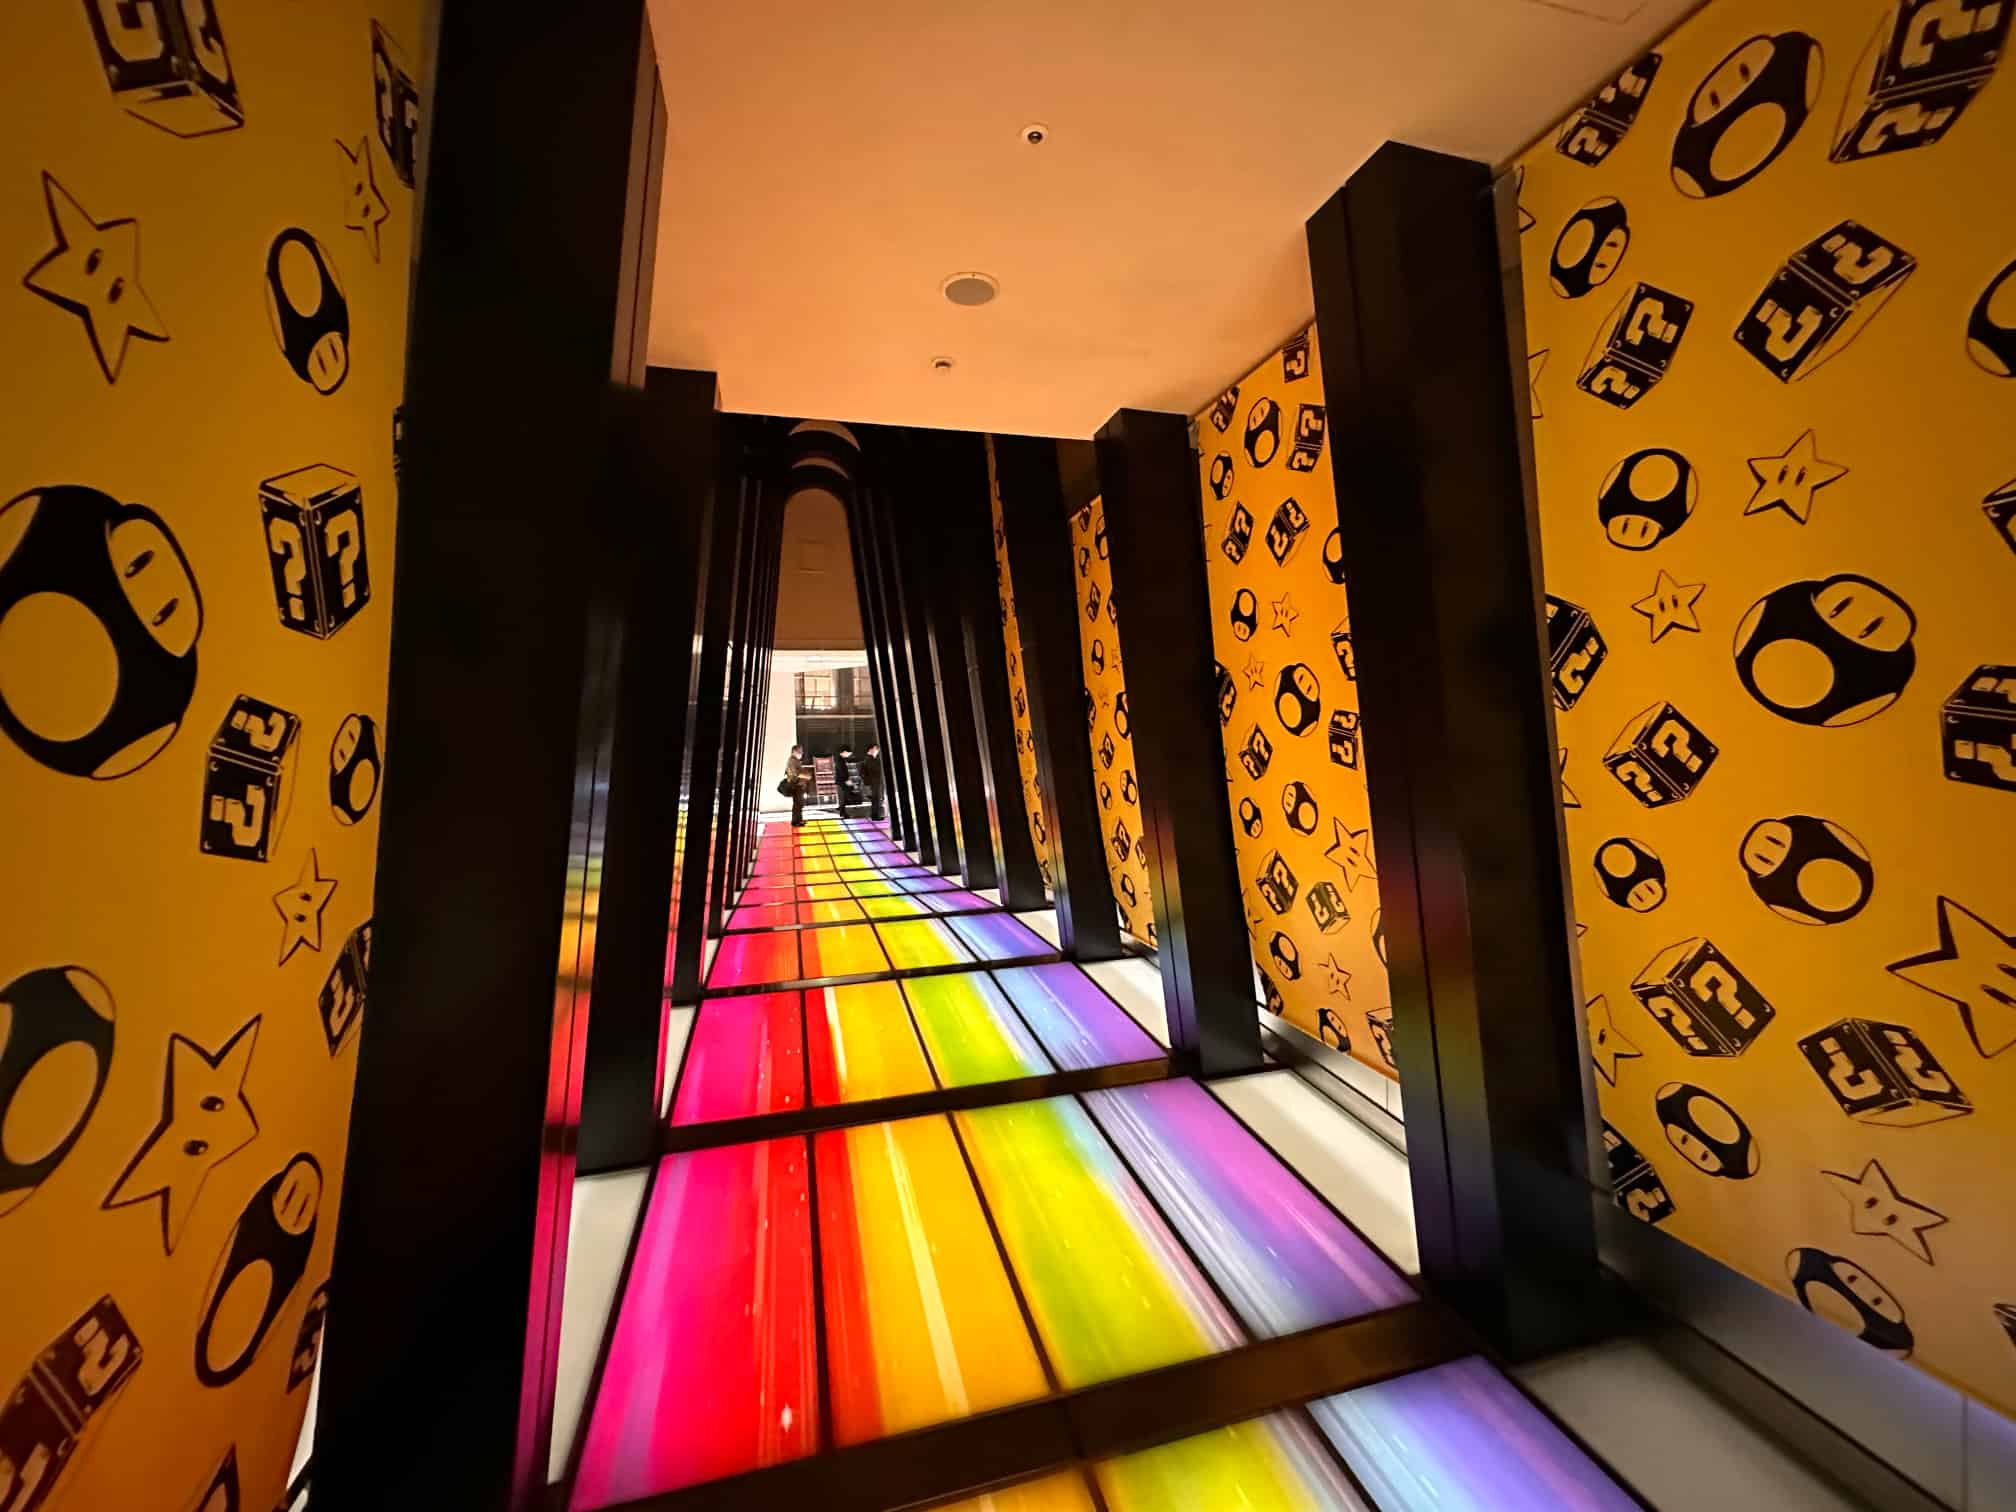 TOHO Cinemas Roppongi Hills corridor inspired by Mario Kart's Rainbow Road, featuring a vibrantly lit floor in rainbow colors and walls adorned with Mario-themed icons such as stars, mushrooms, and question blocks